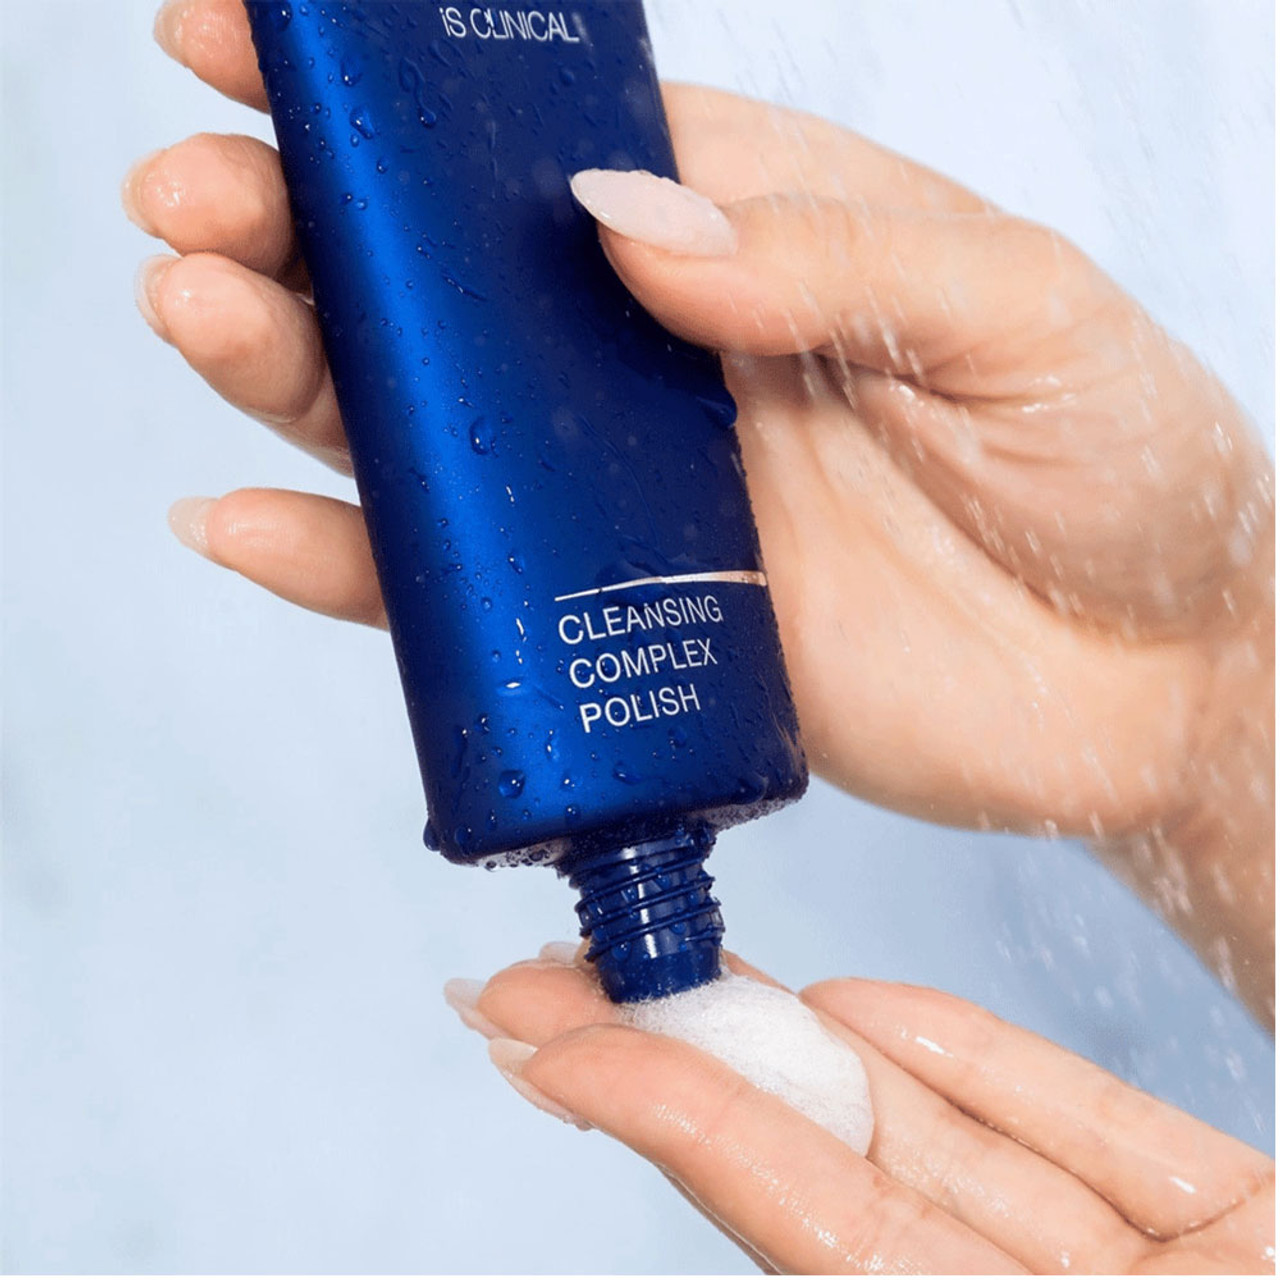 Cleansing Complex Polish - Melloy Medical Group Store by iS Clinical